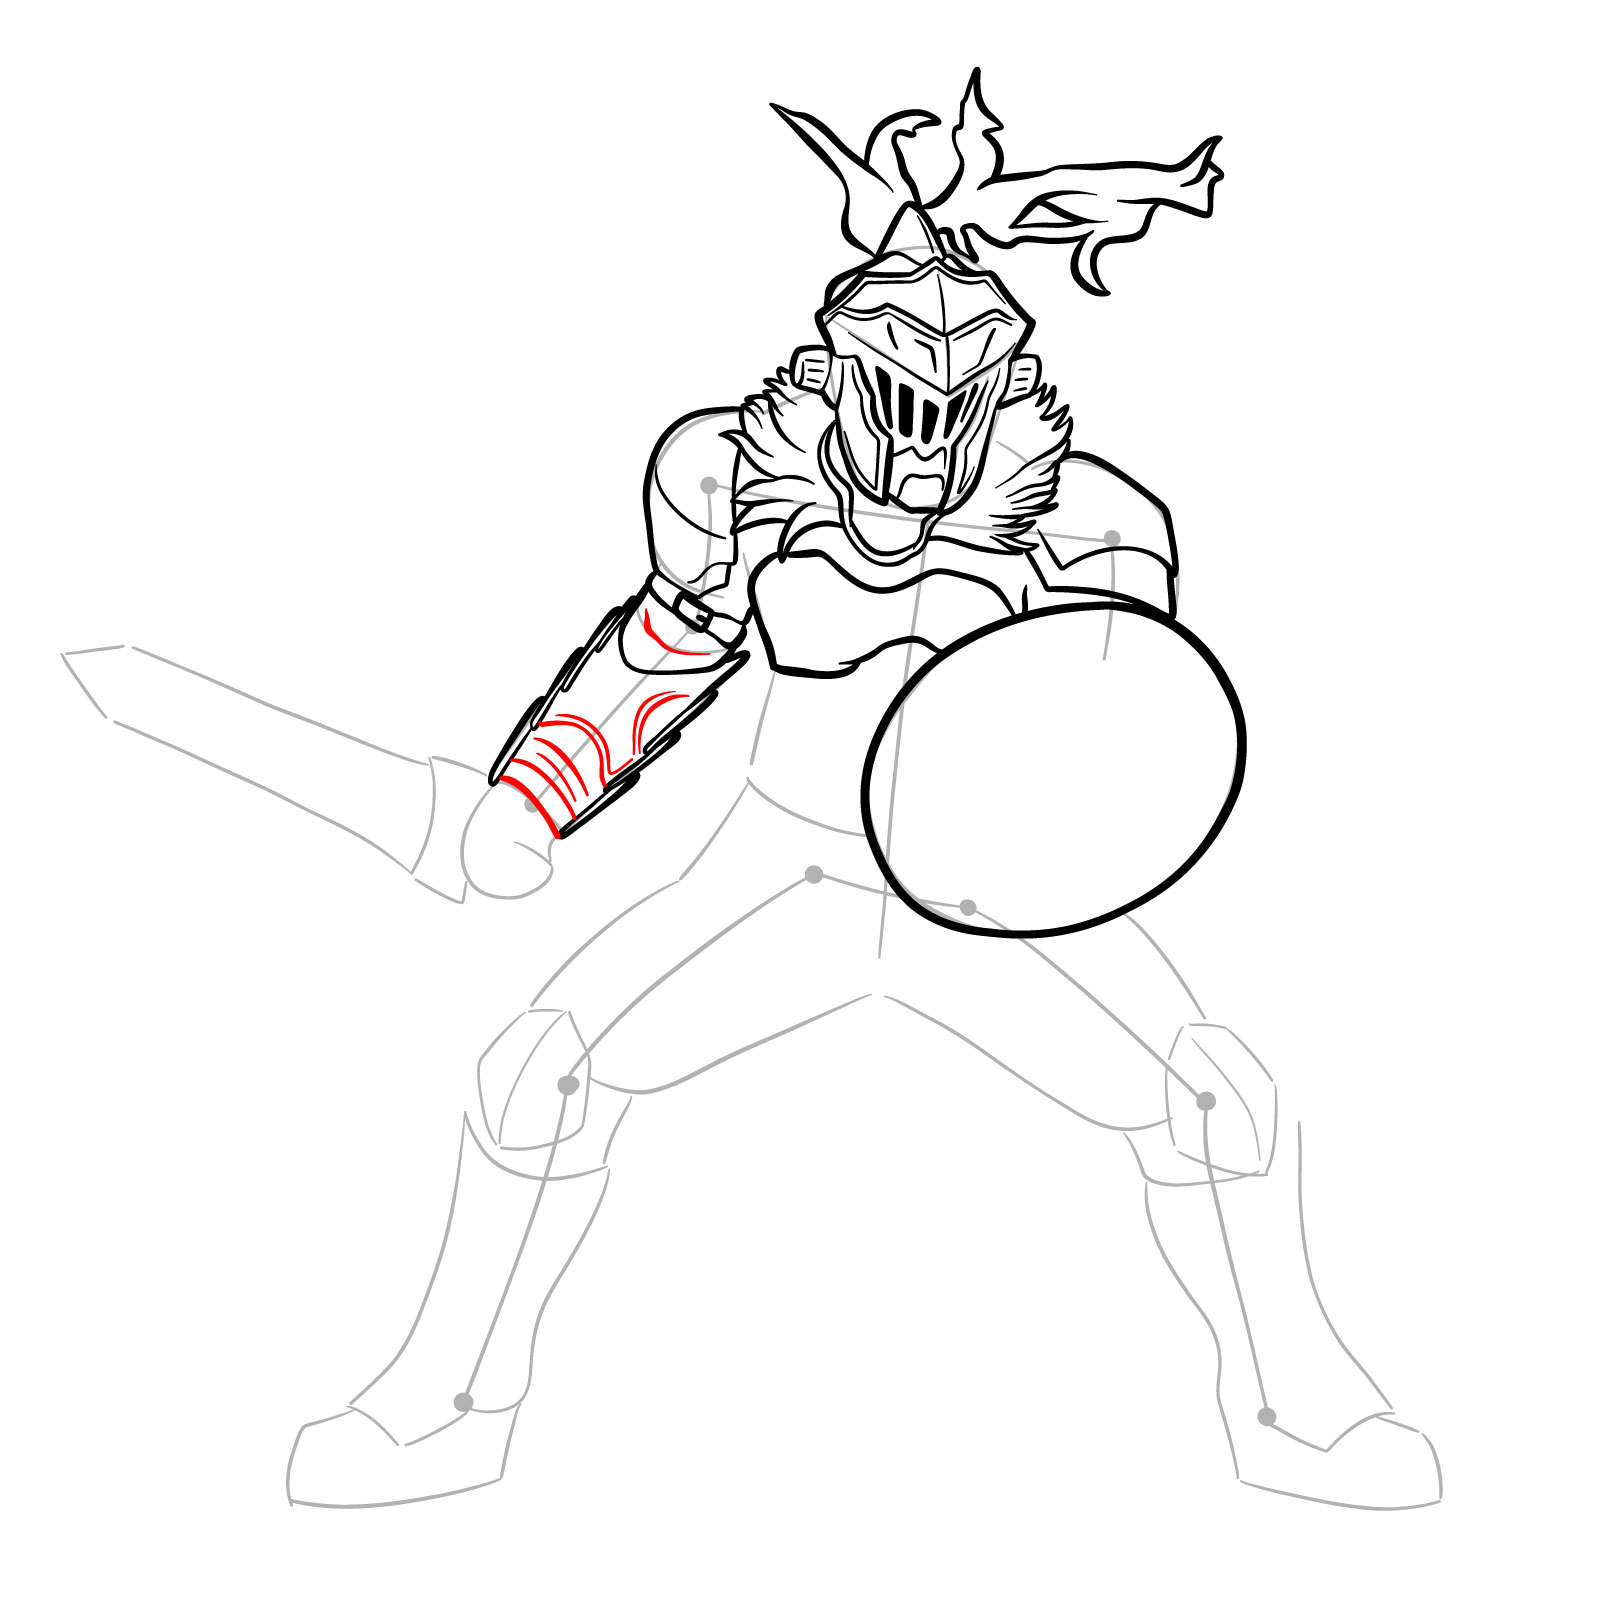 How to Draw Goblin Slayer in battle stance - step 20